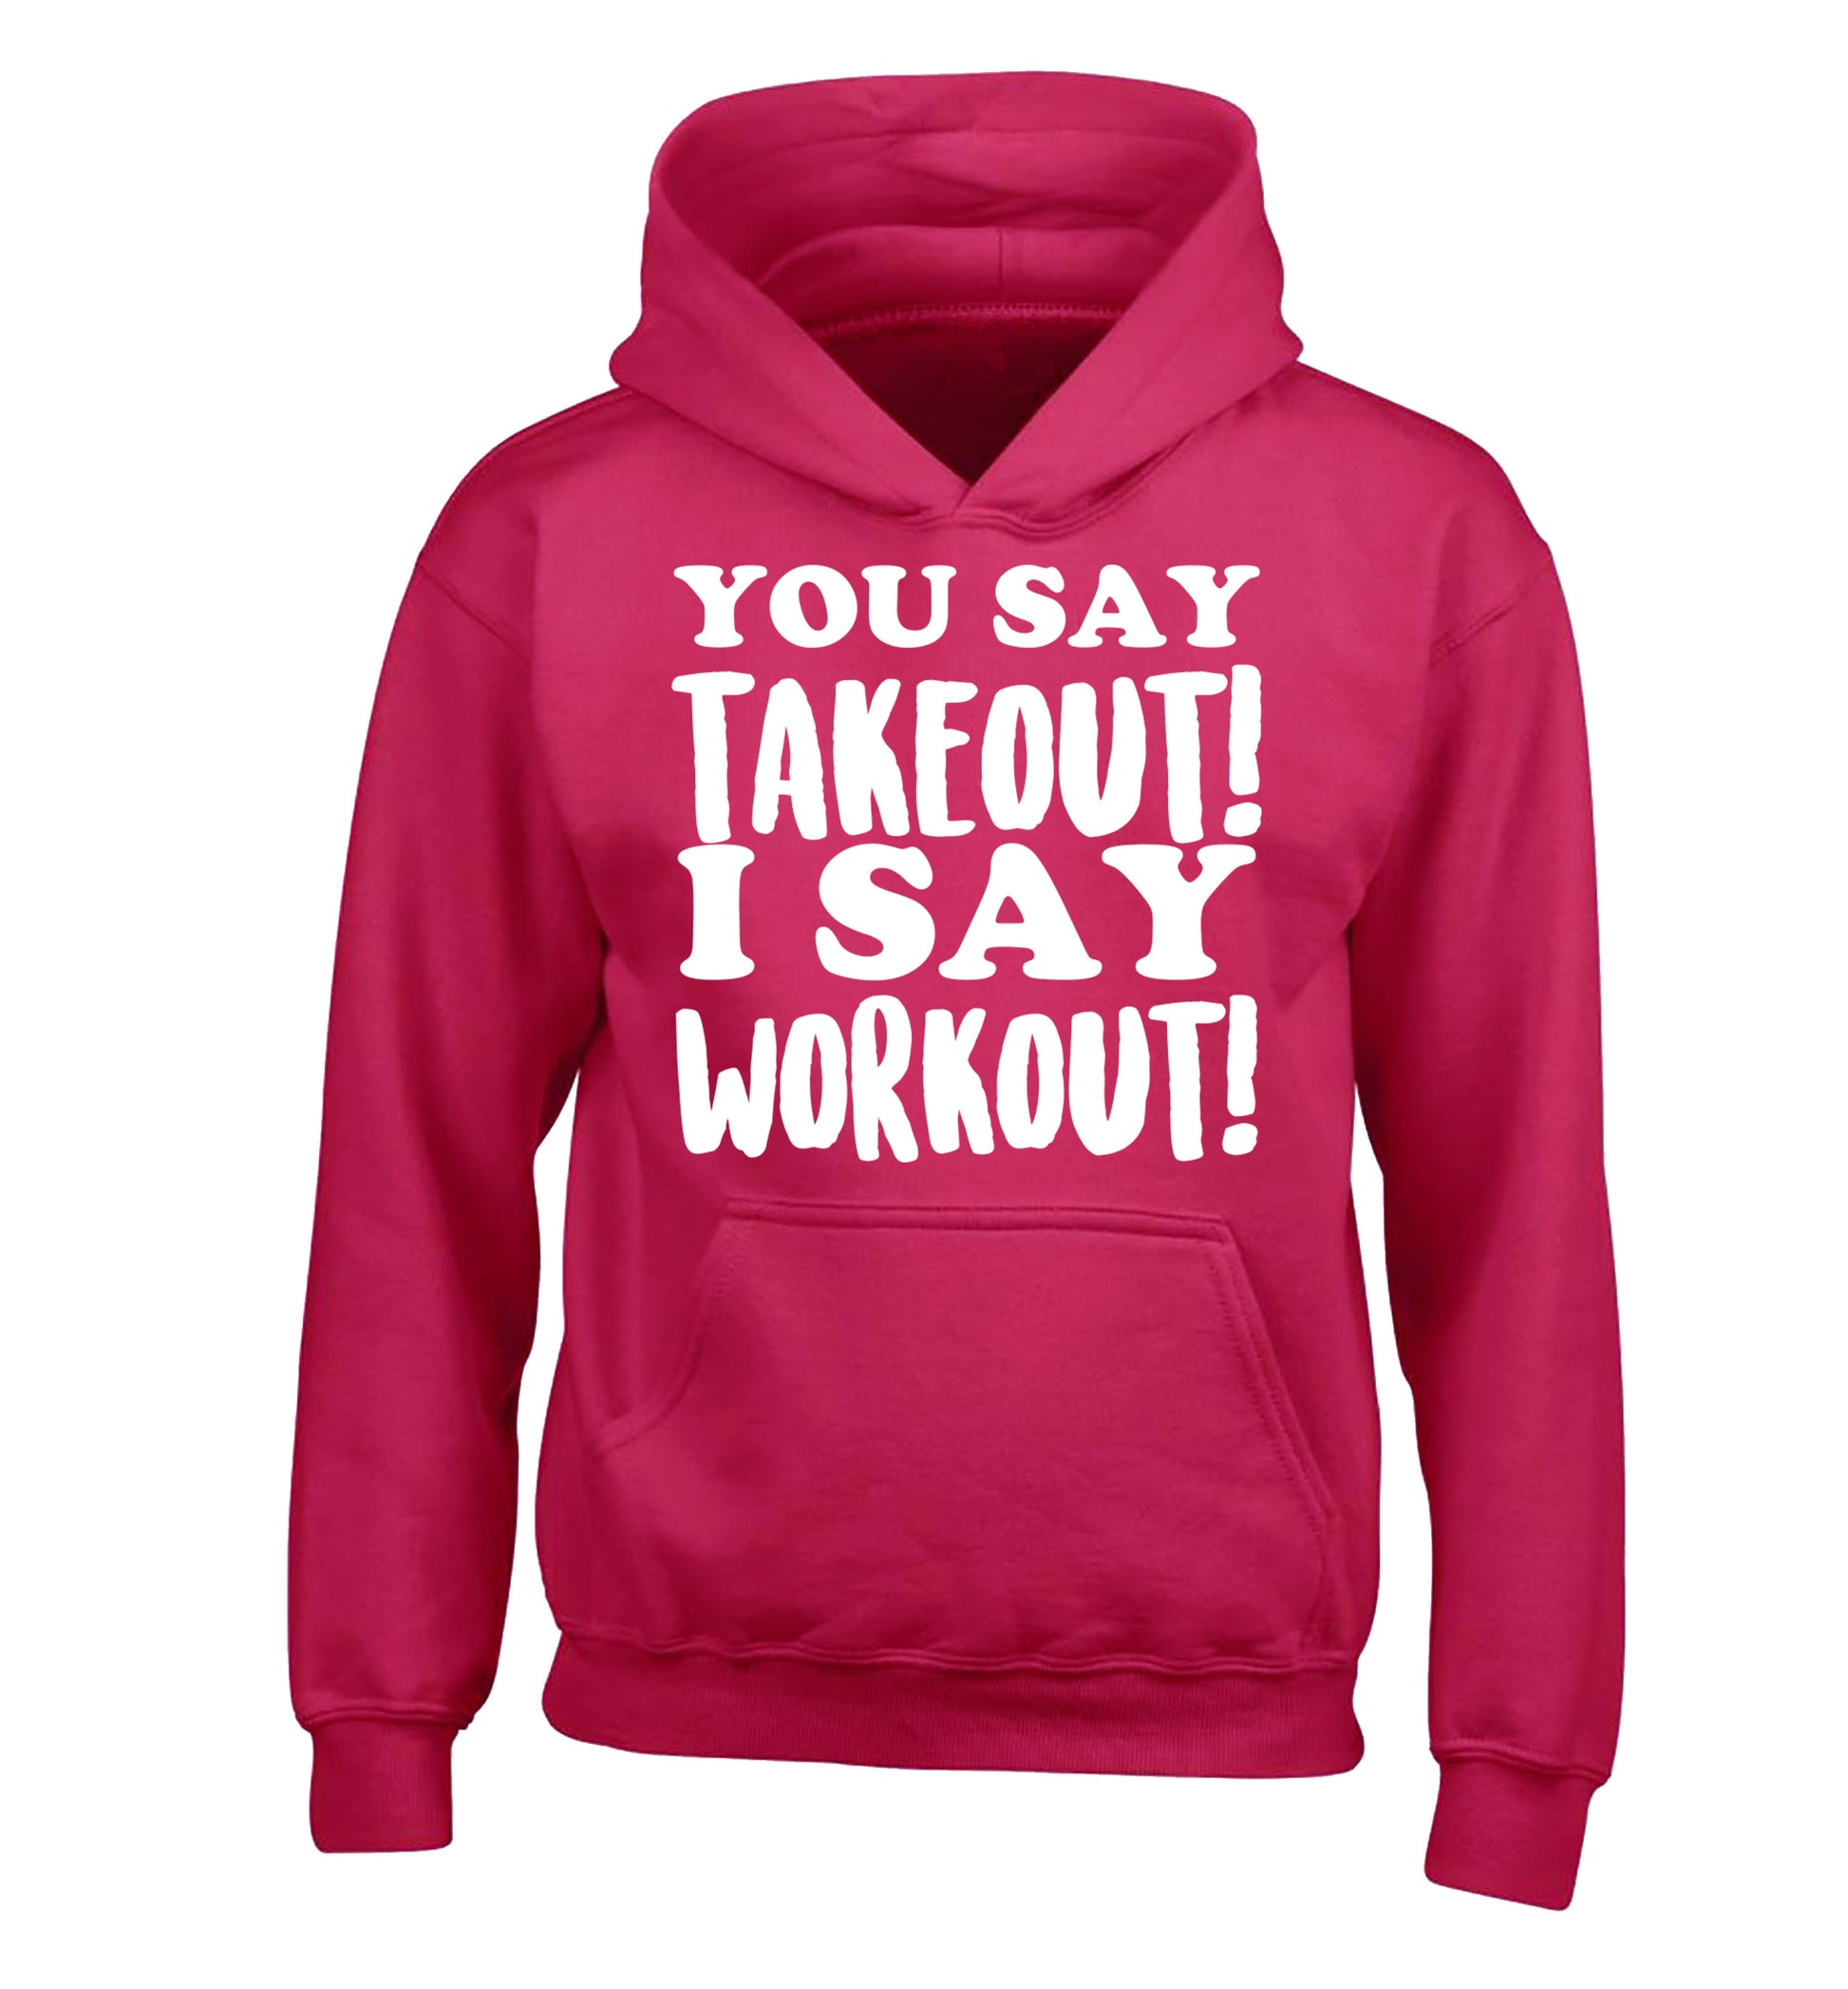 You say takeout I say workout! children's pink hoodie 12-14 Years